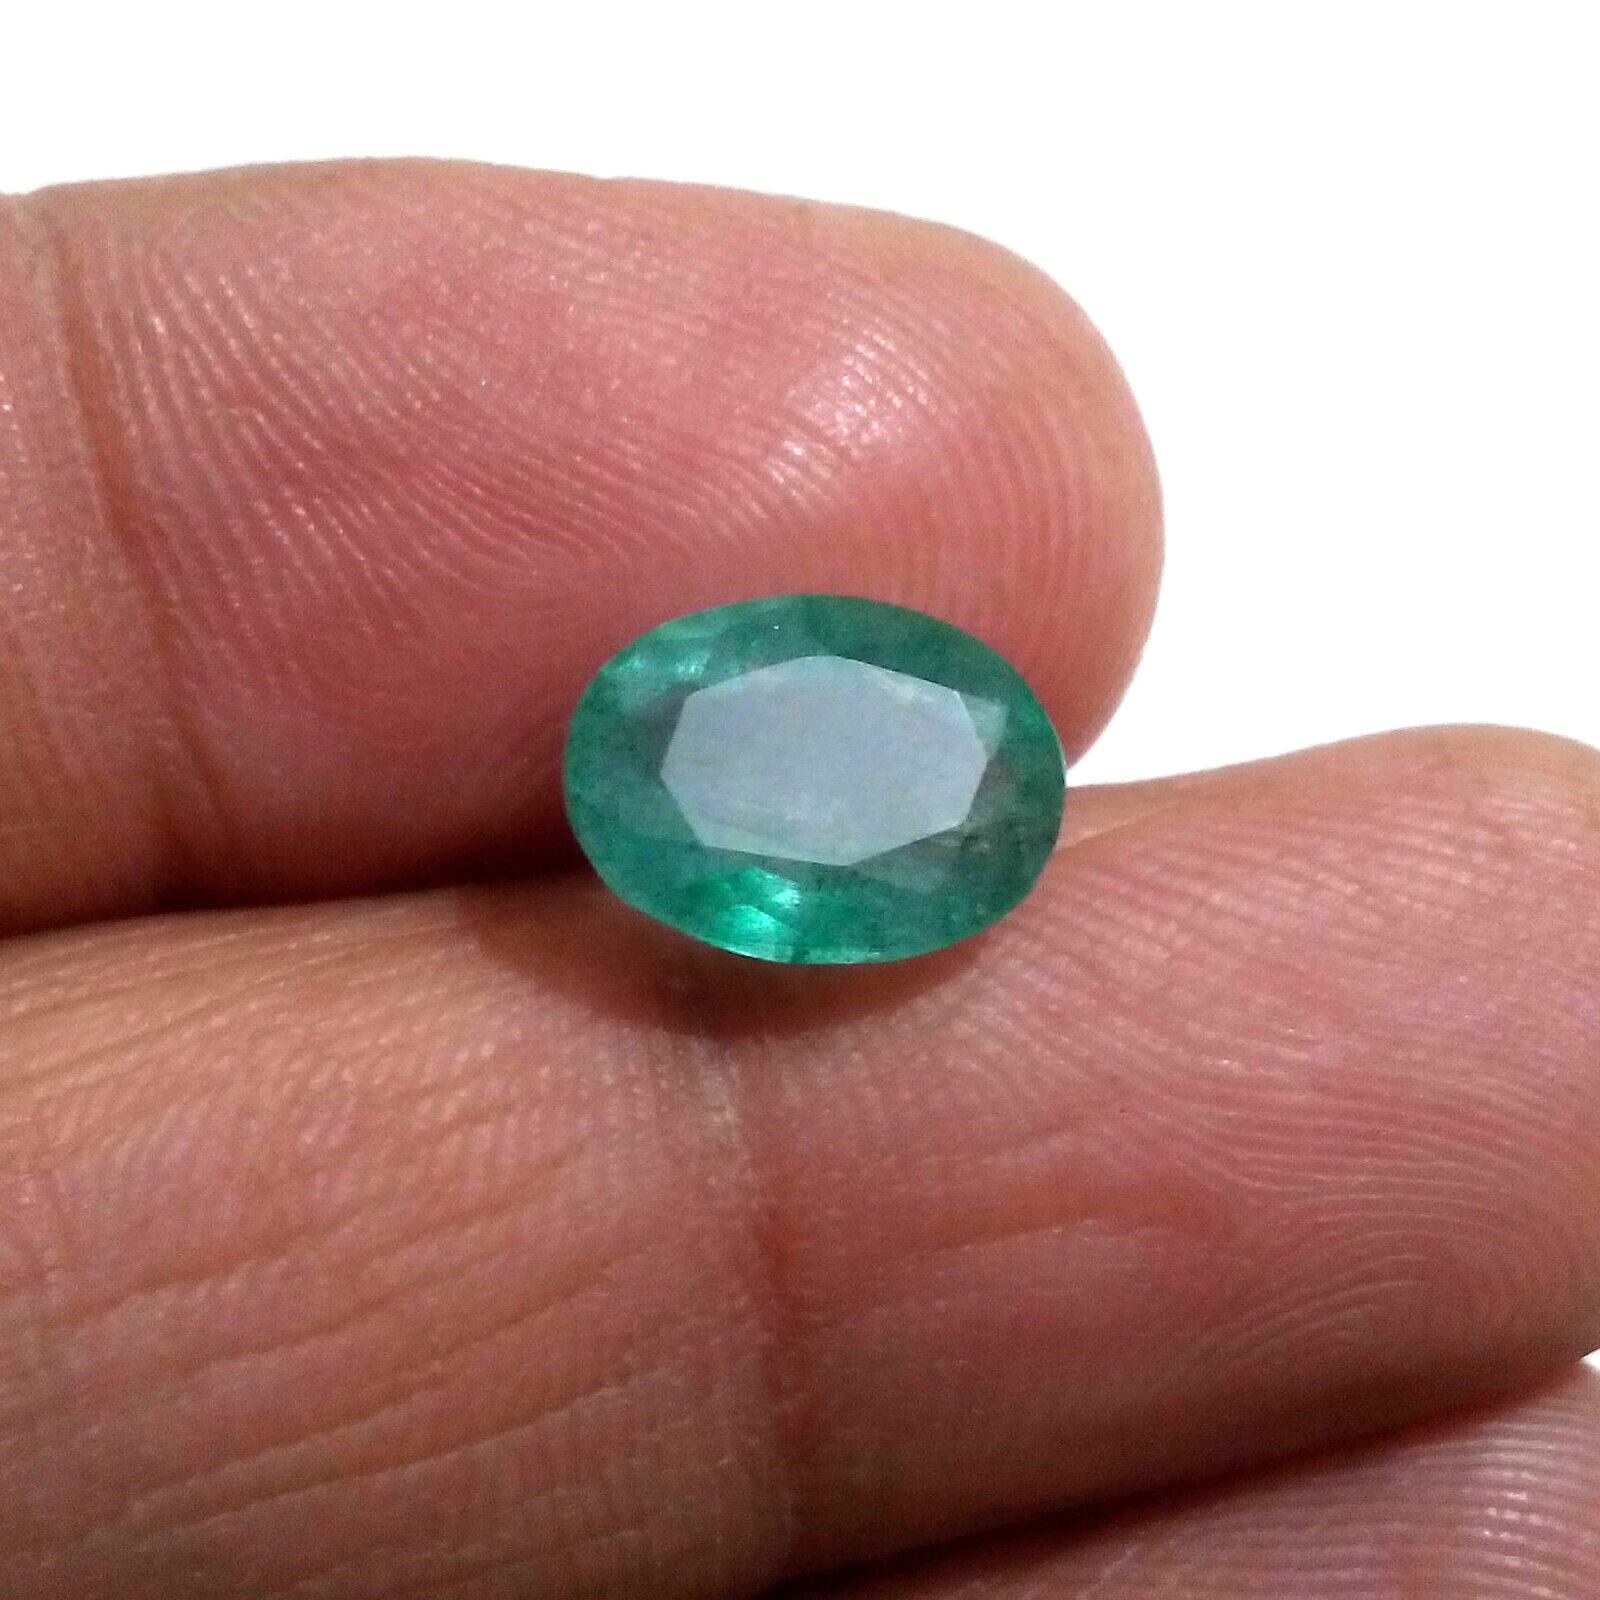 Excellent Zambian Emerald Faceted Oval Shape 3.30 Crt Top Green Loose Gemstone